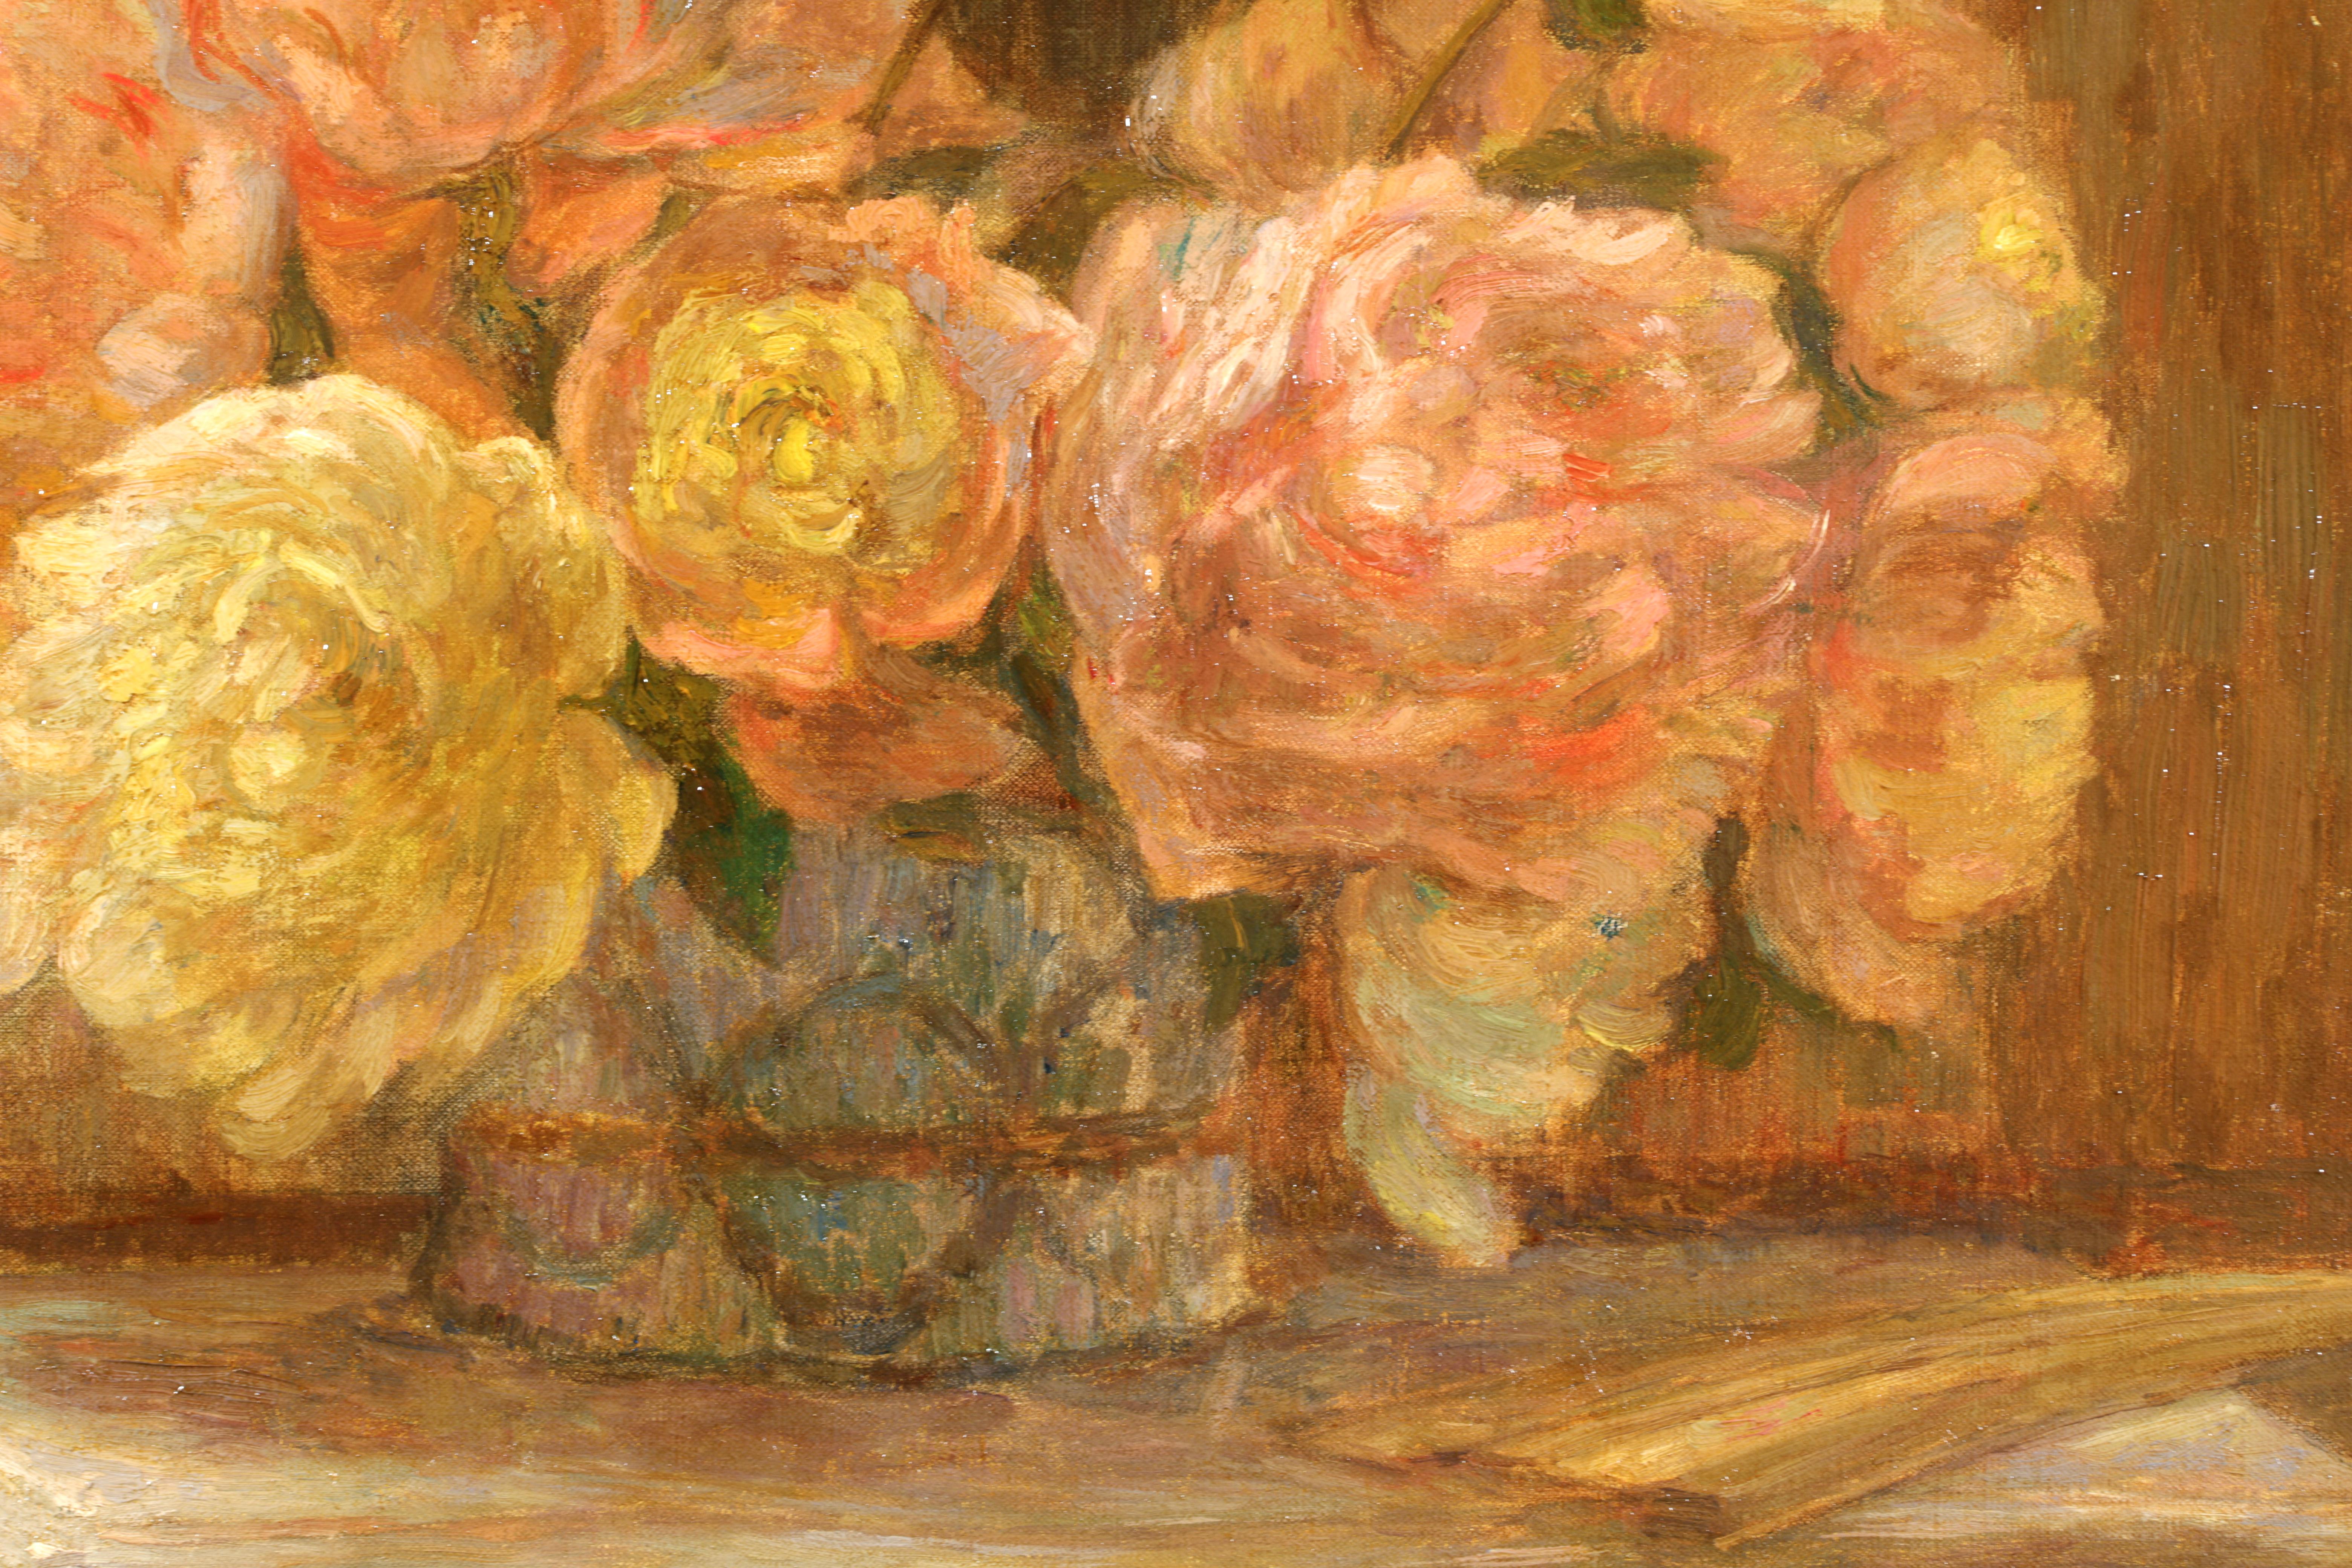 Signed still life oil on canvas circa 1910 by French impressionist painter Marie Duhem. This stunning piece depicts delicate pink and yellow peonies in a vase placed on an ornate marble-topped table with a fan resting beside them and a mirror